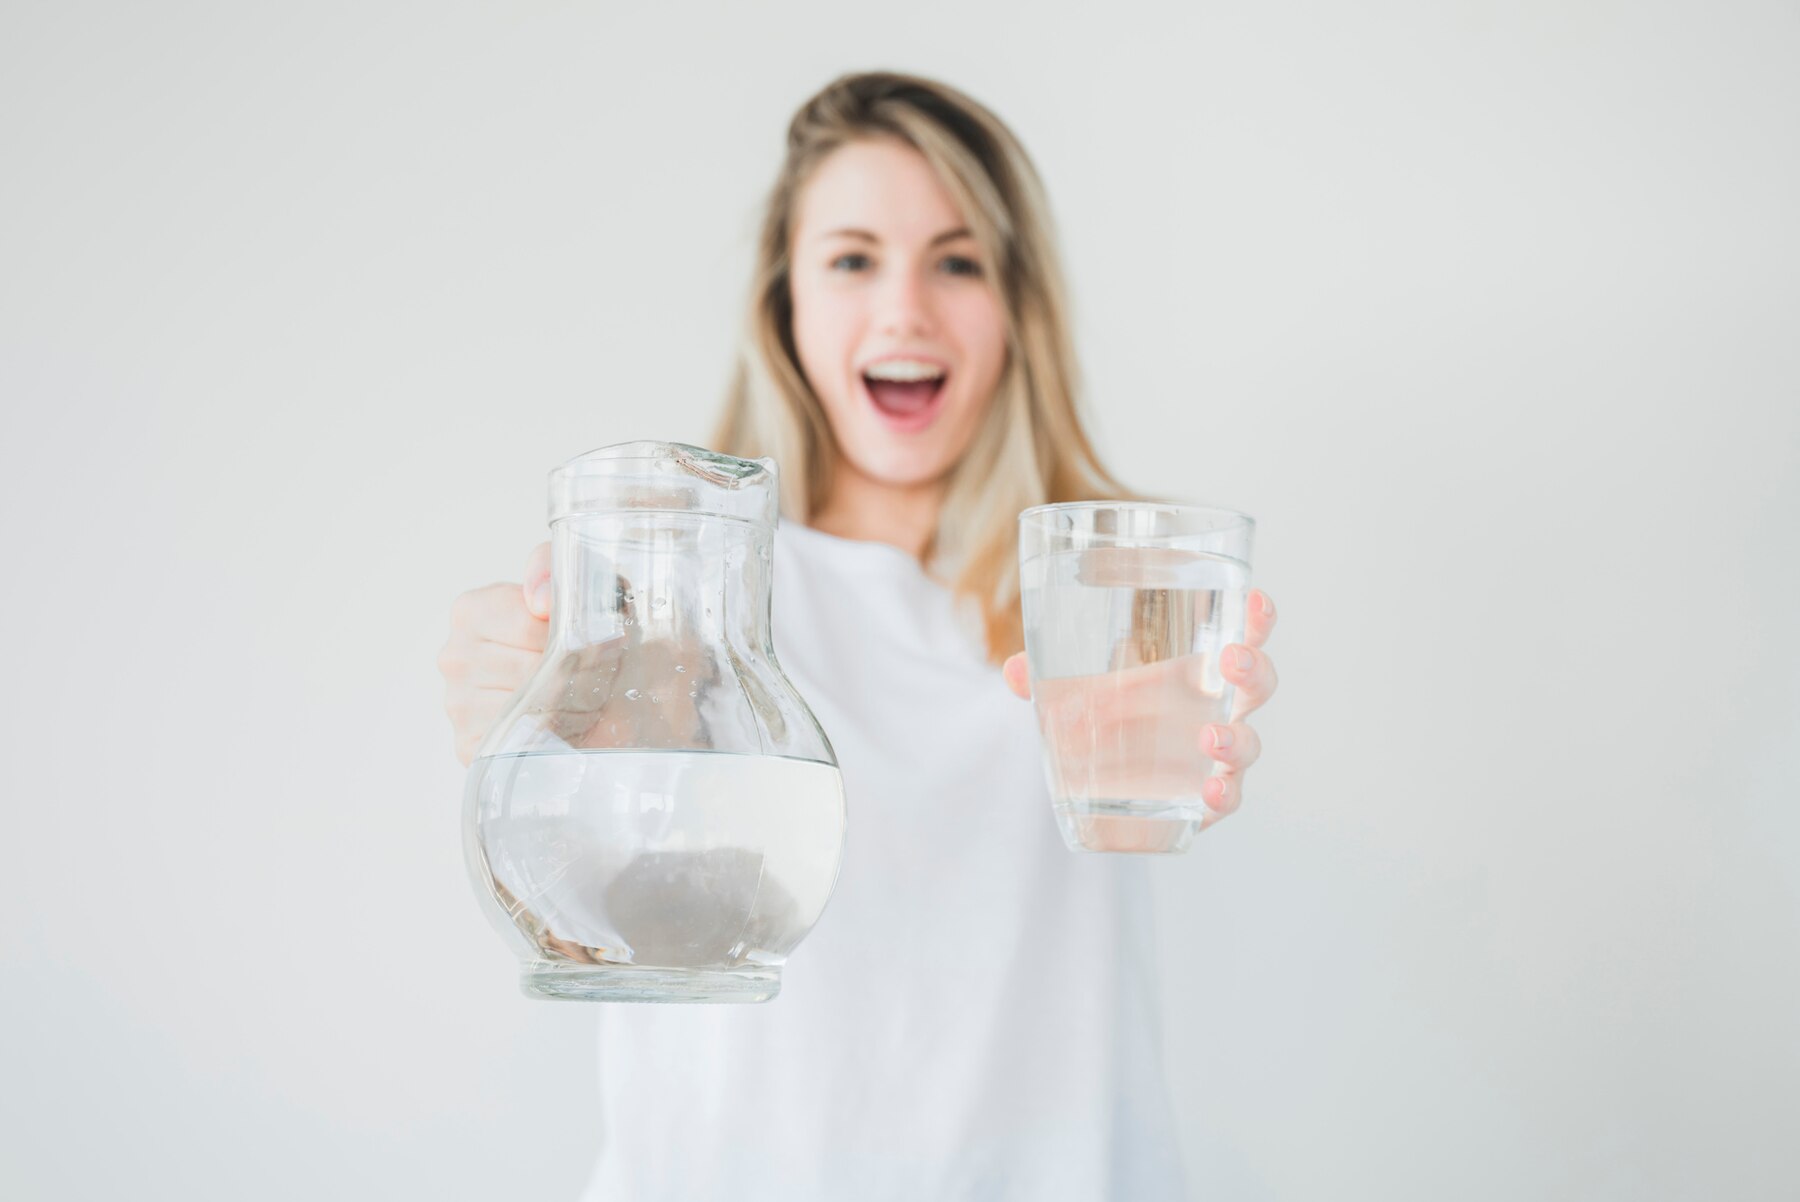 blonde-girl-holding-jar-and-glass-of-water_23-2148113497.jpg